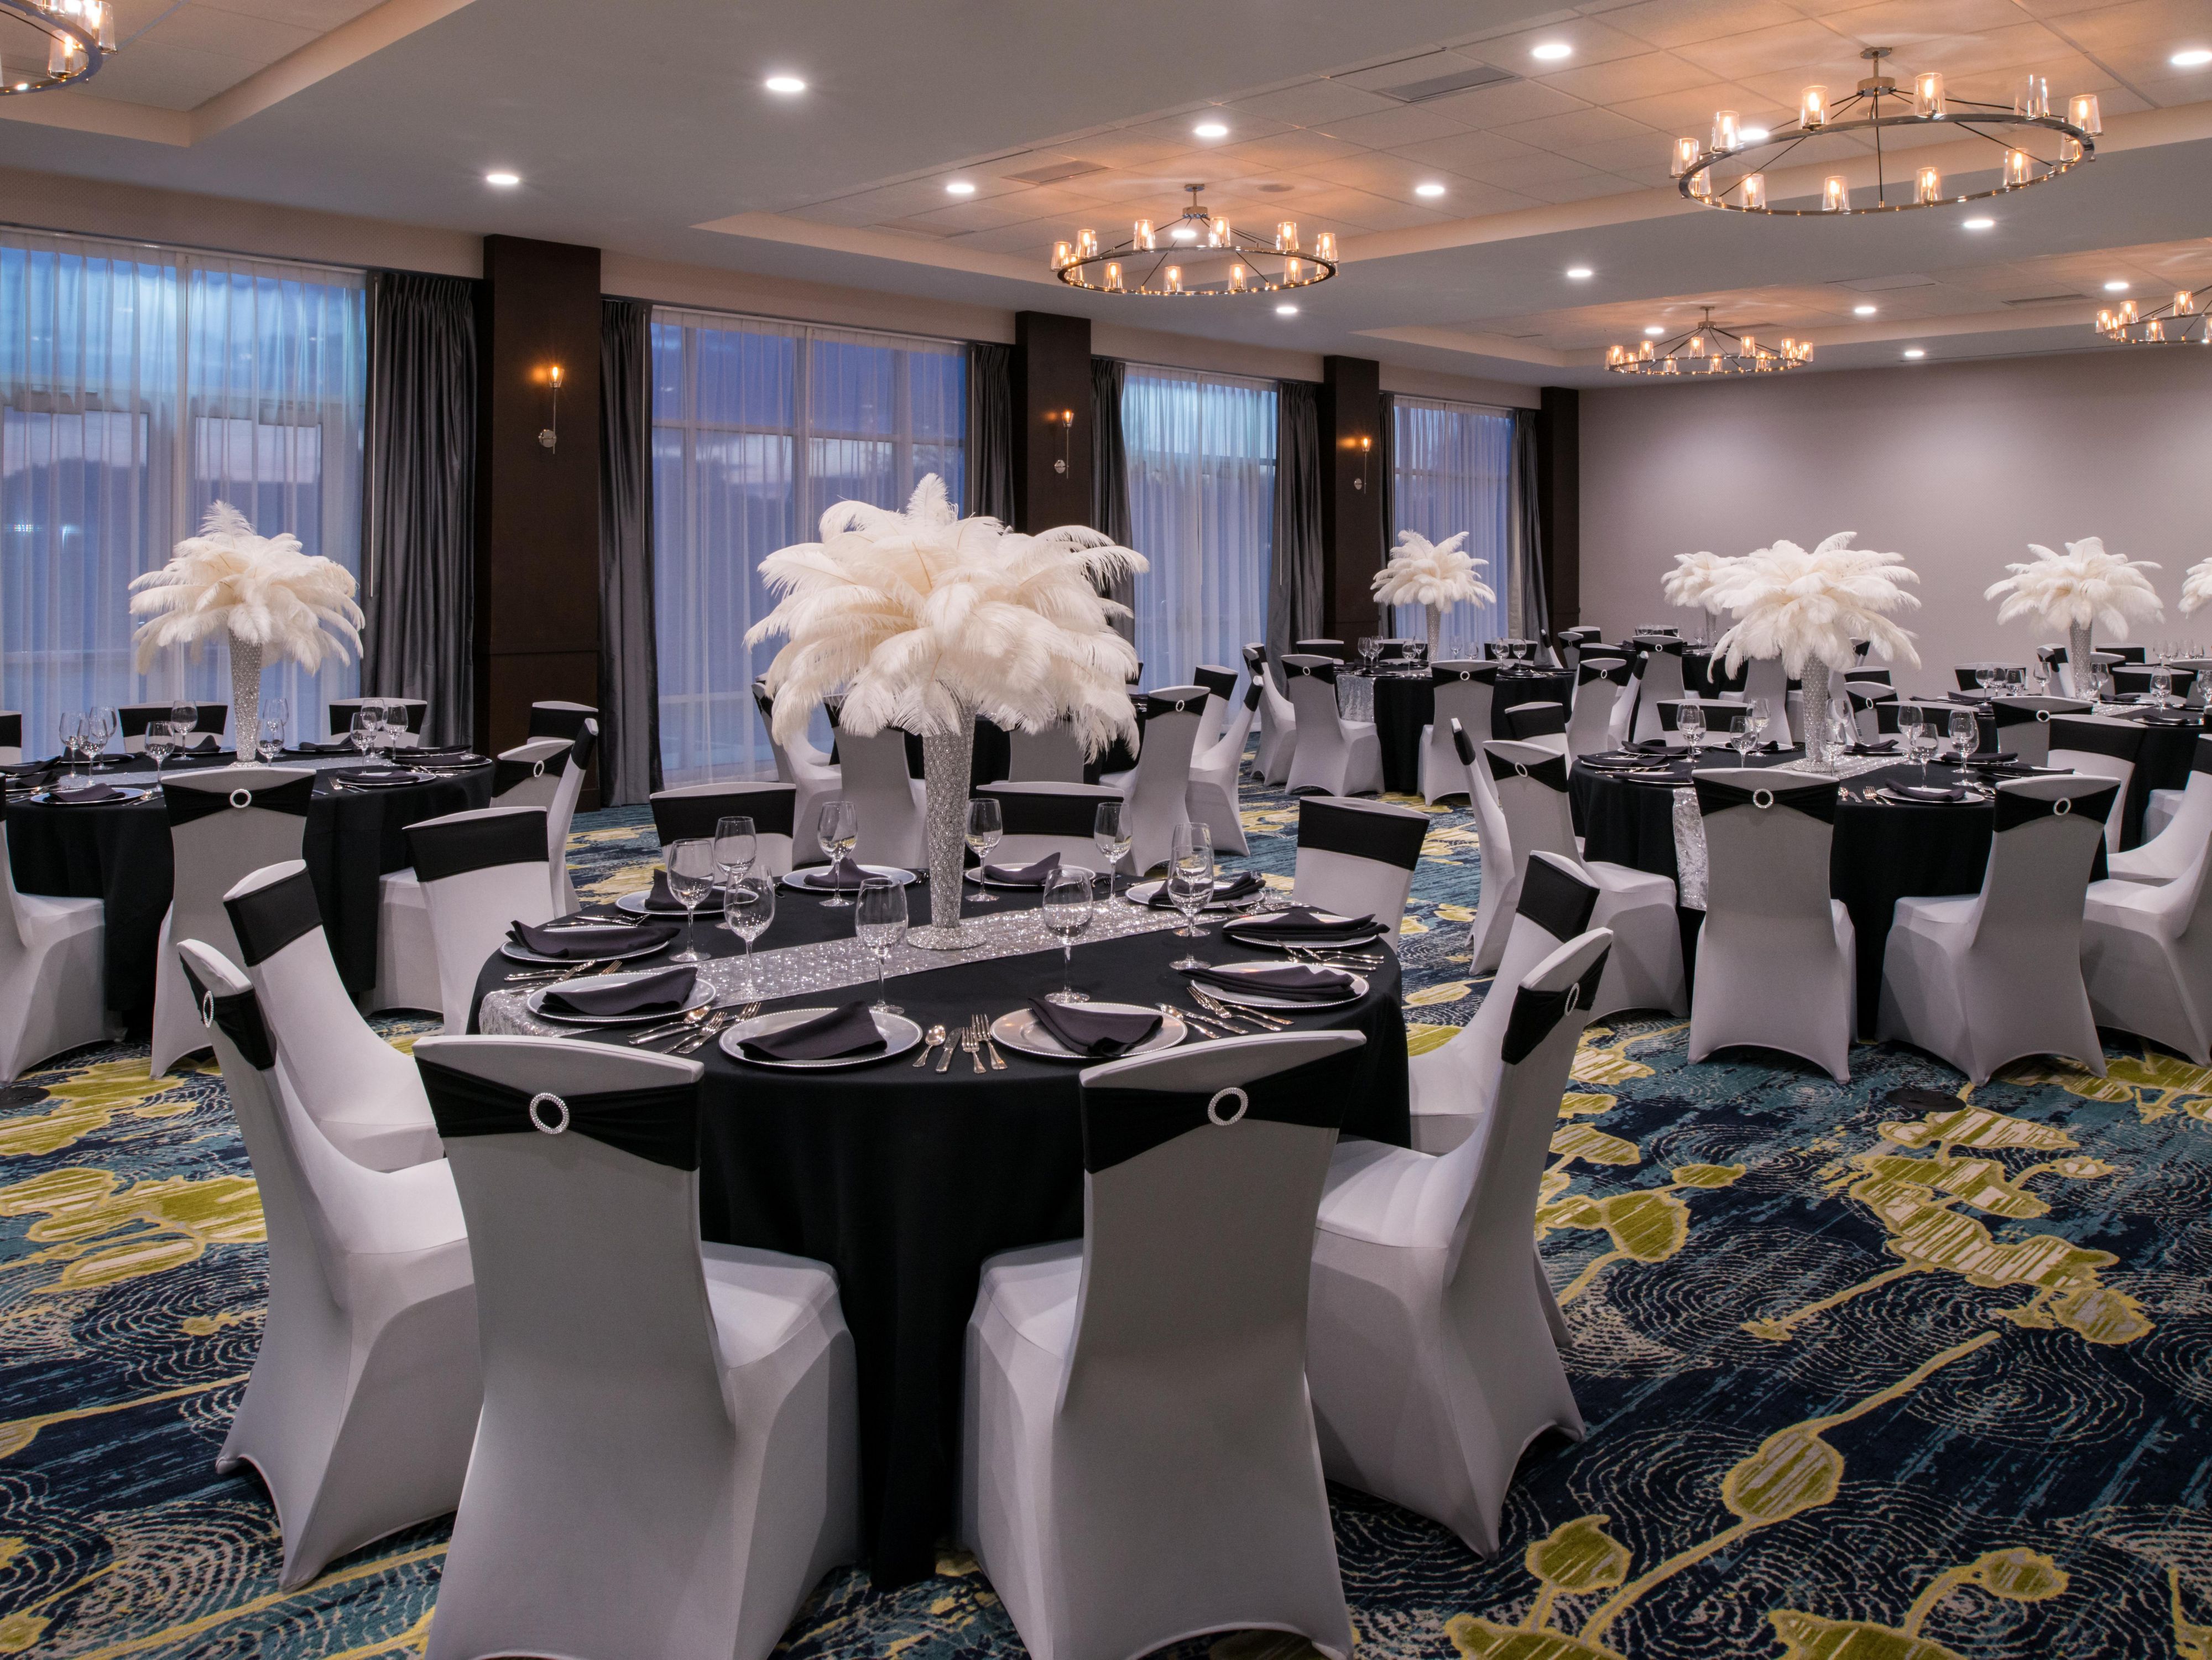 Host your next family reunion, corporate meeting, or graduation dinner at our event space in Farmington Hills. Our beautiful Hamilton Grand Ballroom offers 4,489 square feet of meeting space for 300-400 guests. Make it a stress-free event with our planning, catering, and decorating services. Contact us to start organizing the perfect event.